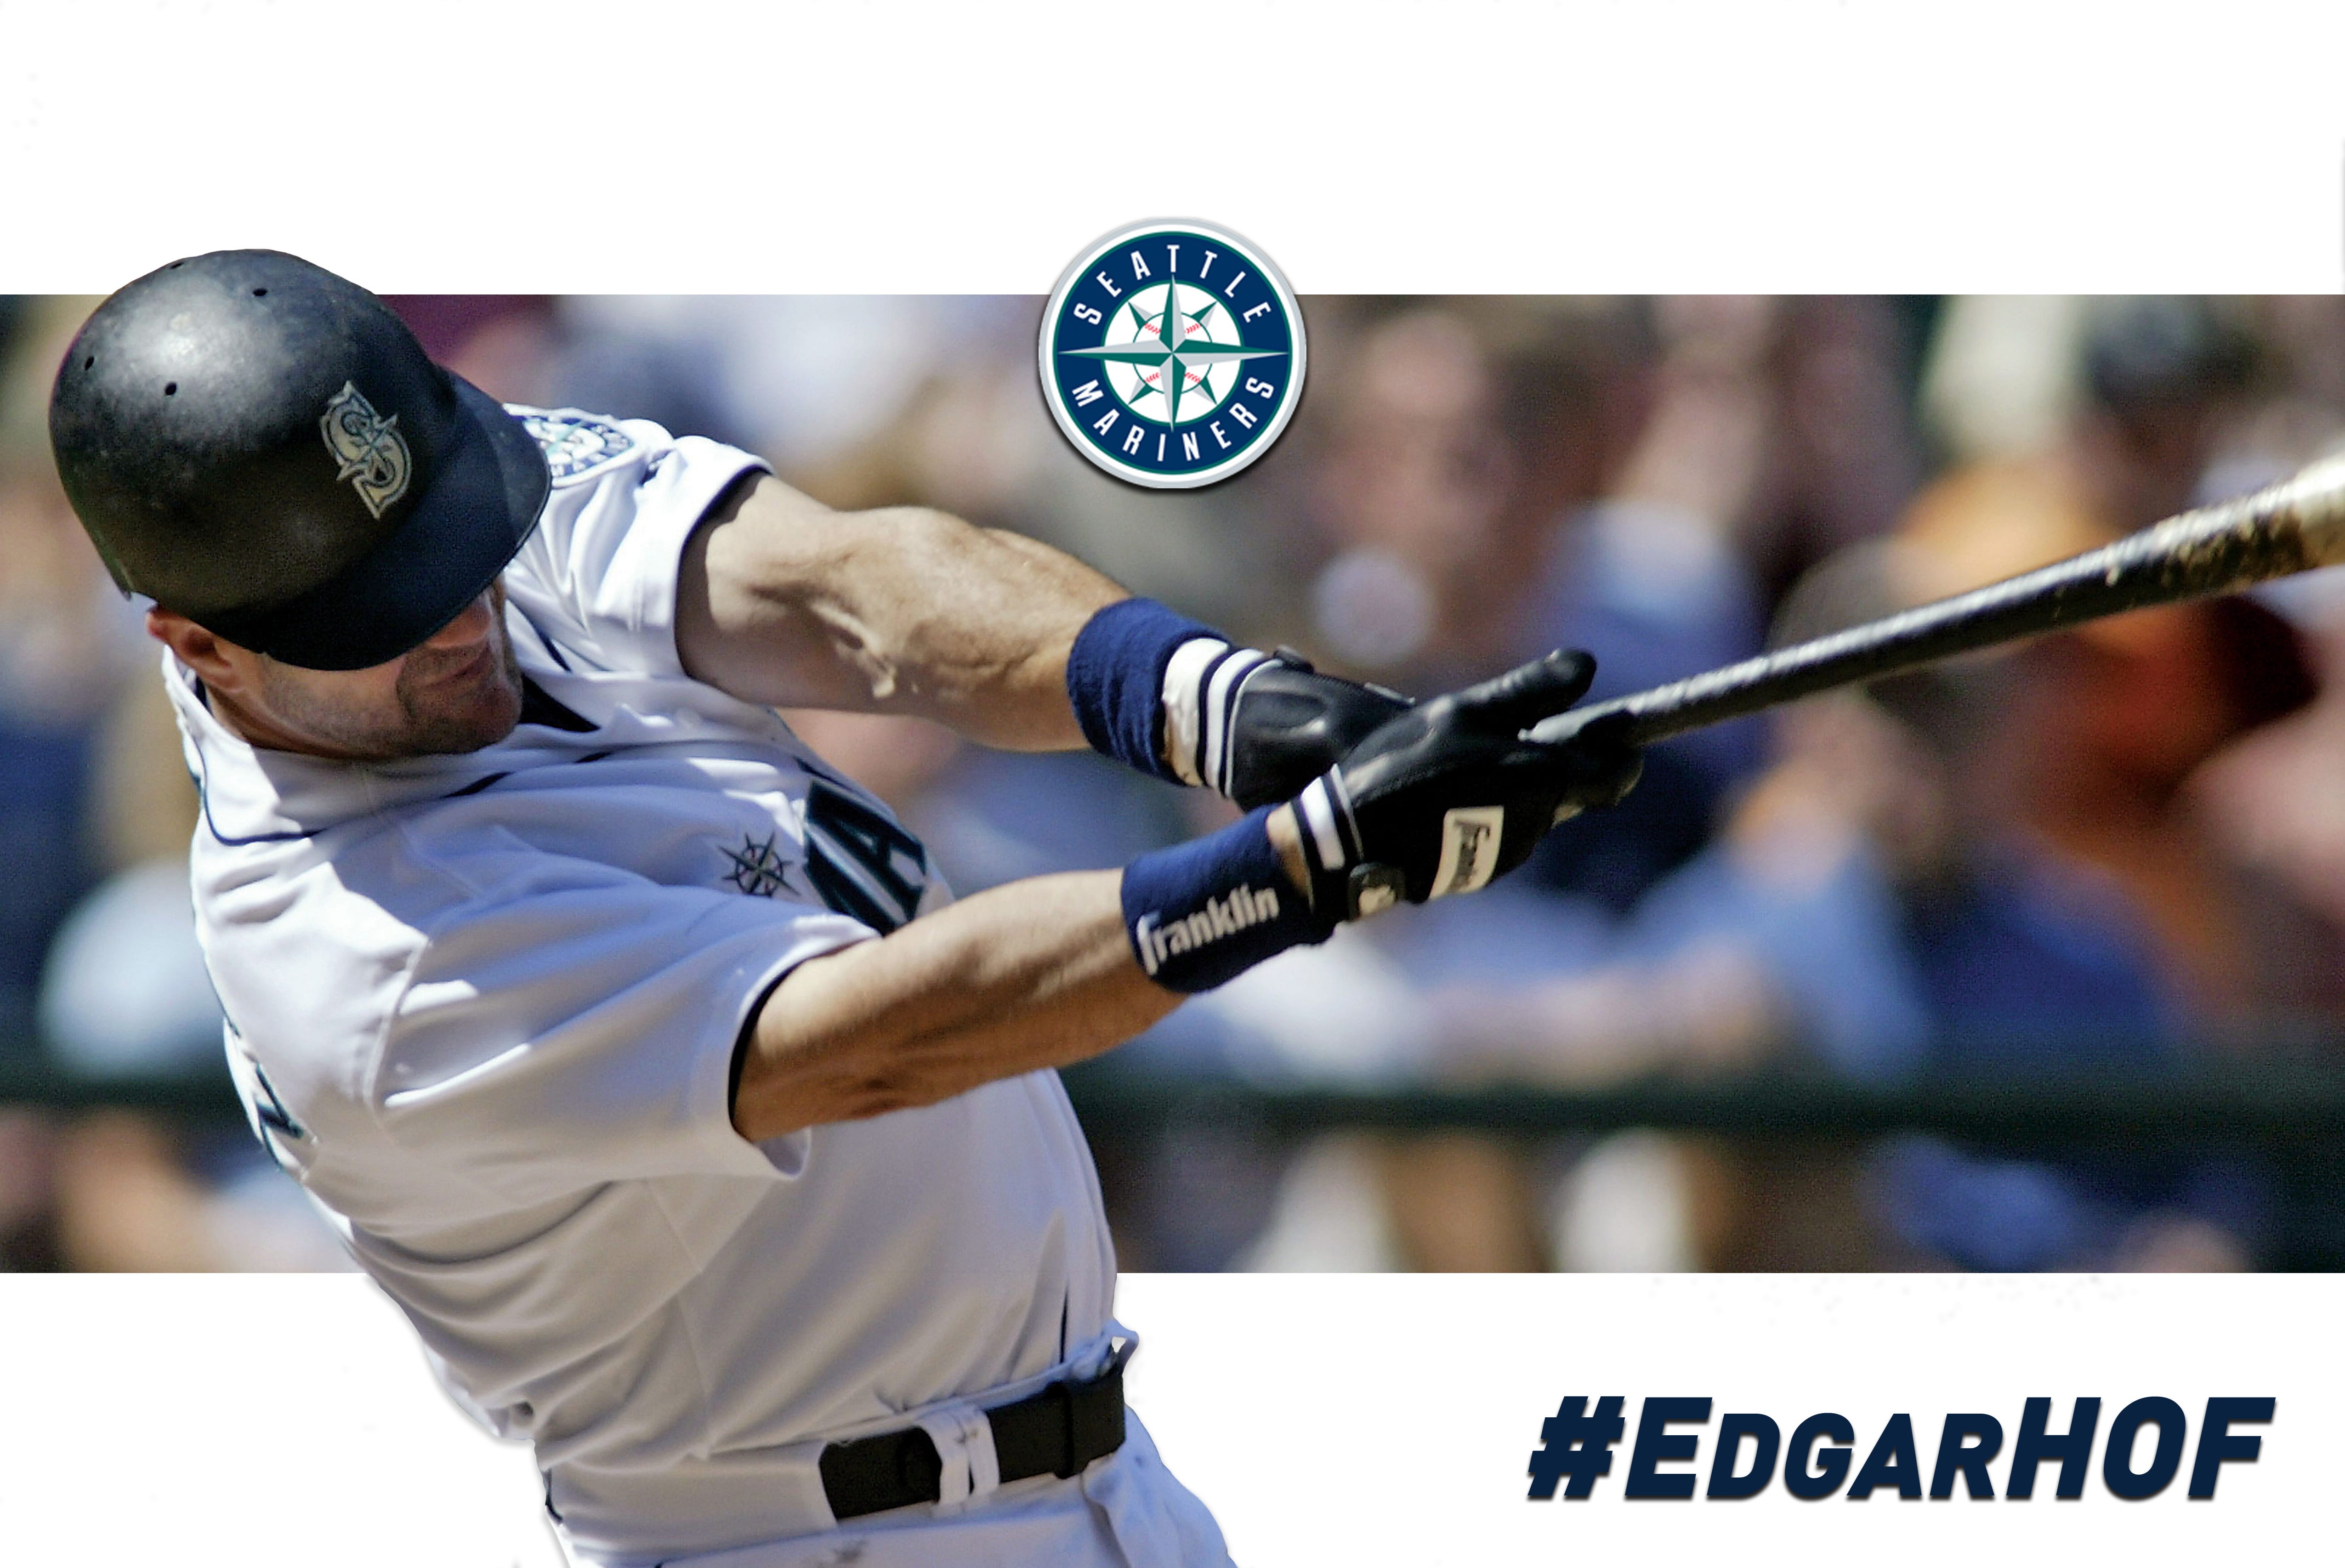 Hall of a Player: Edgar Martinez's Hall of Fame Candidacy